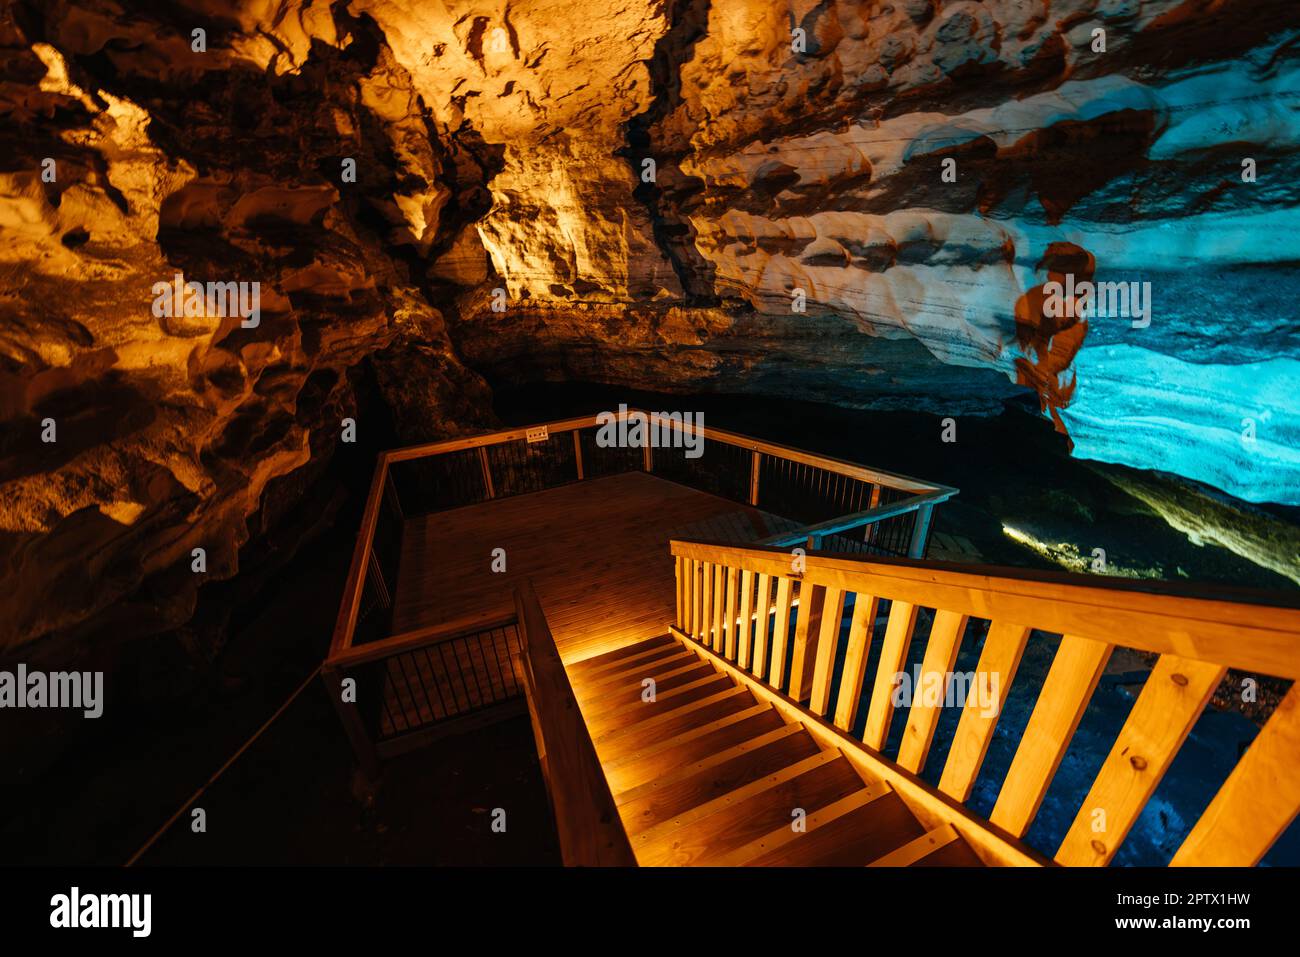 The iconic and popular Engelbrecht Cave system which is a sinkhole underneath Mt Gambier CBD in South Australia, Australia Stock Photo